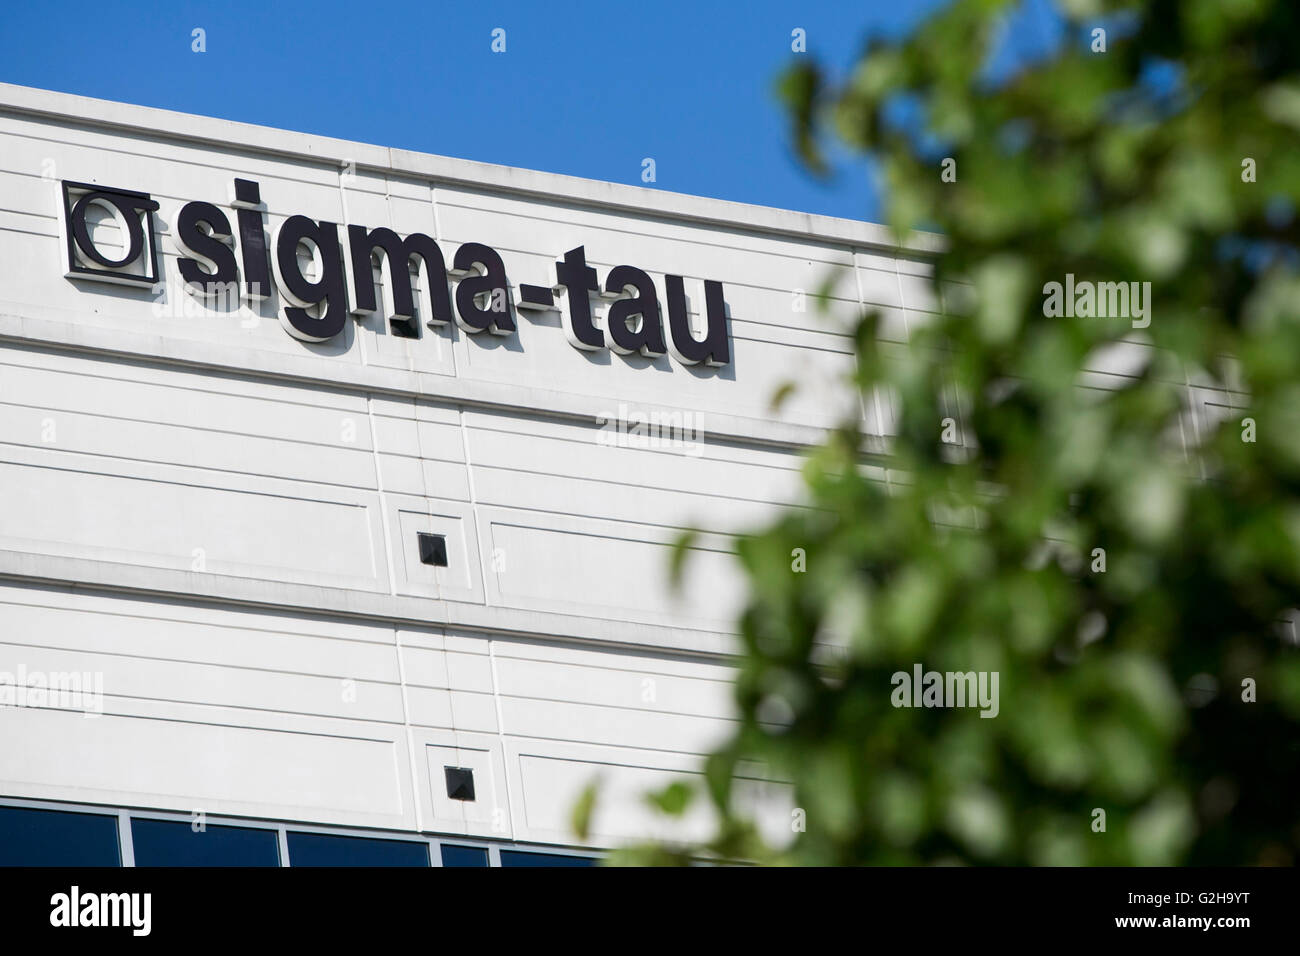 A logo sign outside of a facility occupied by Sigma-Tau Pharmaceuticals, Inc., in Gaithersburg, Maryland on May 29, 2016. Stock Photo